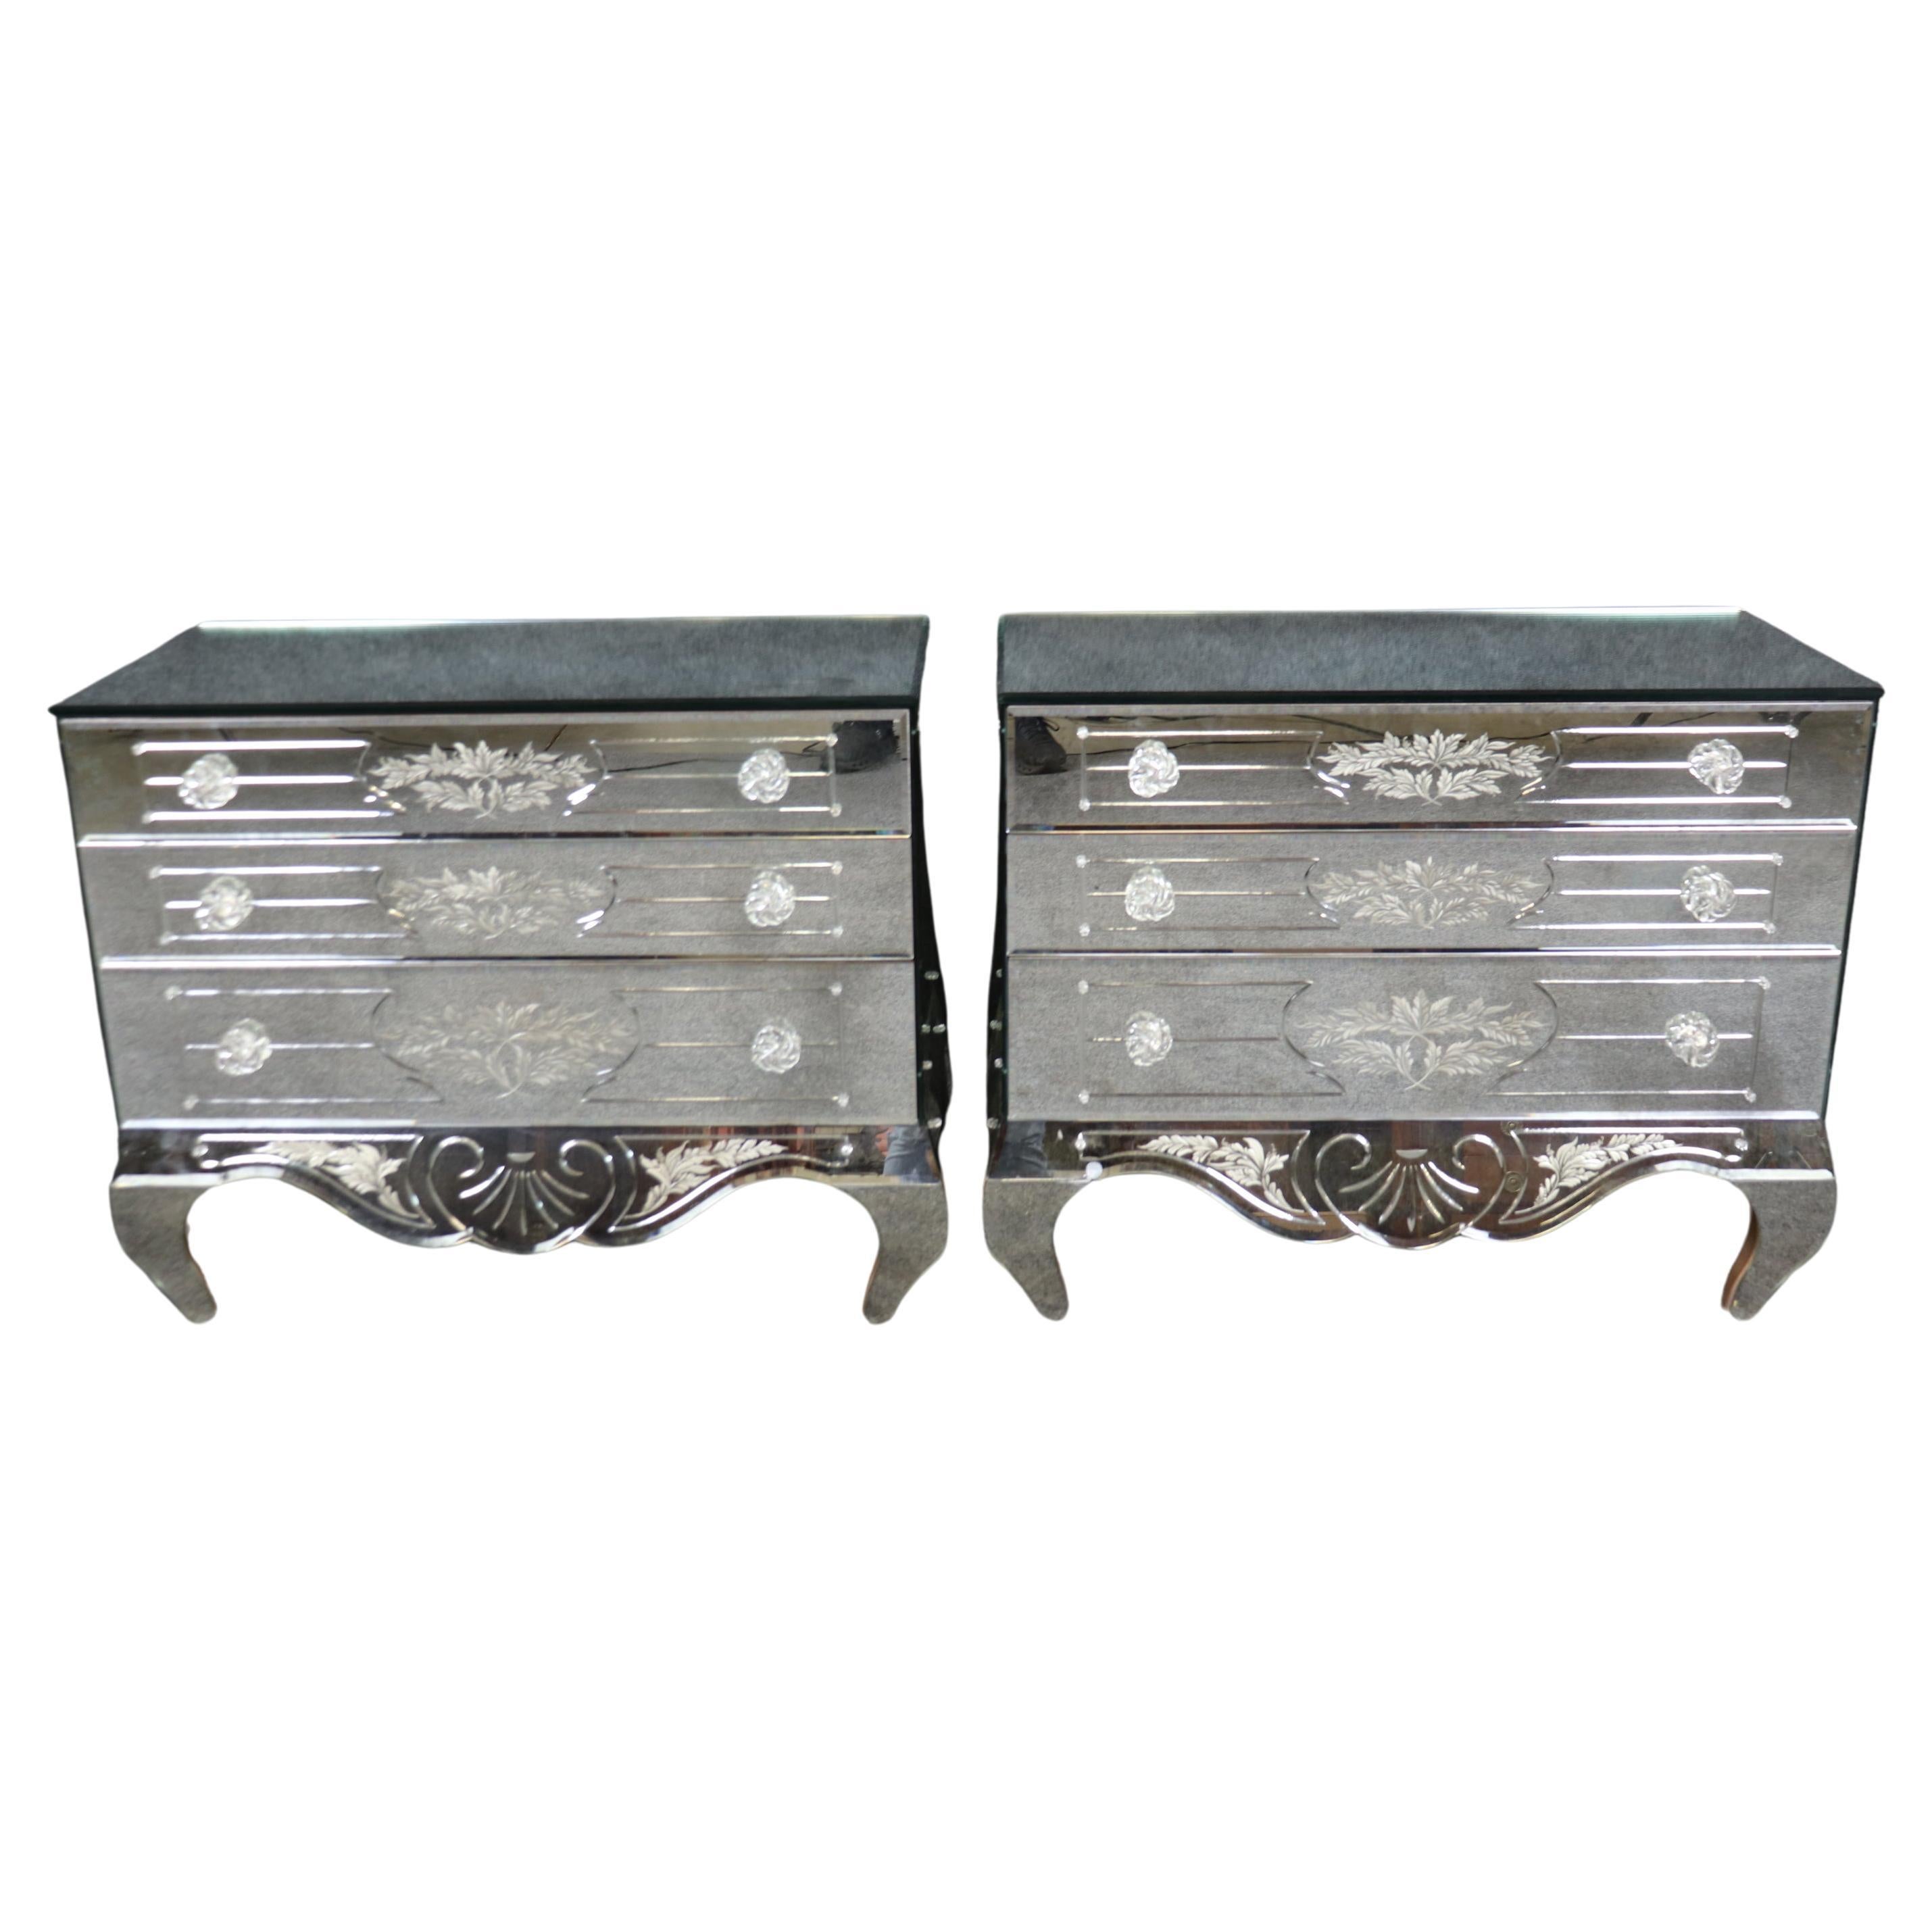 Pair of Floral Etched Glass Italian Louis XV Style Mirrored Commodes Circa 1950s For Sale